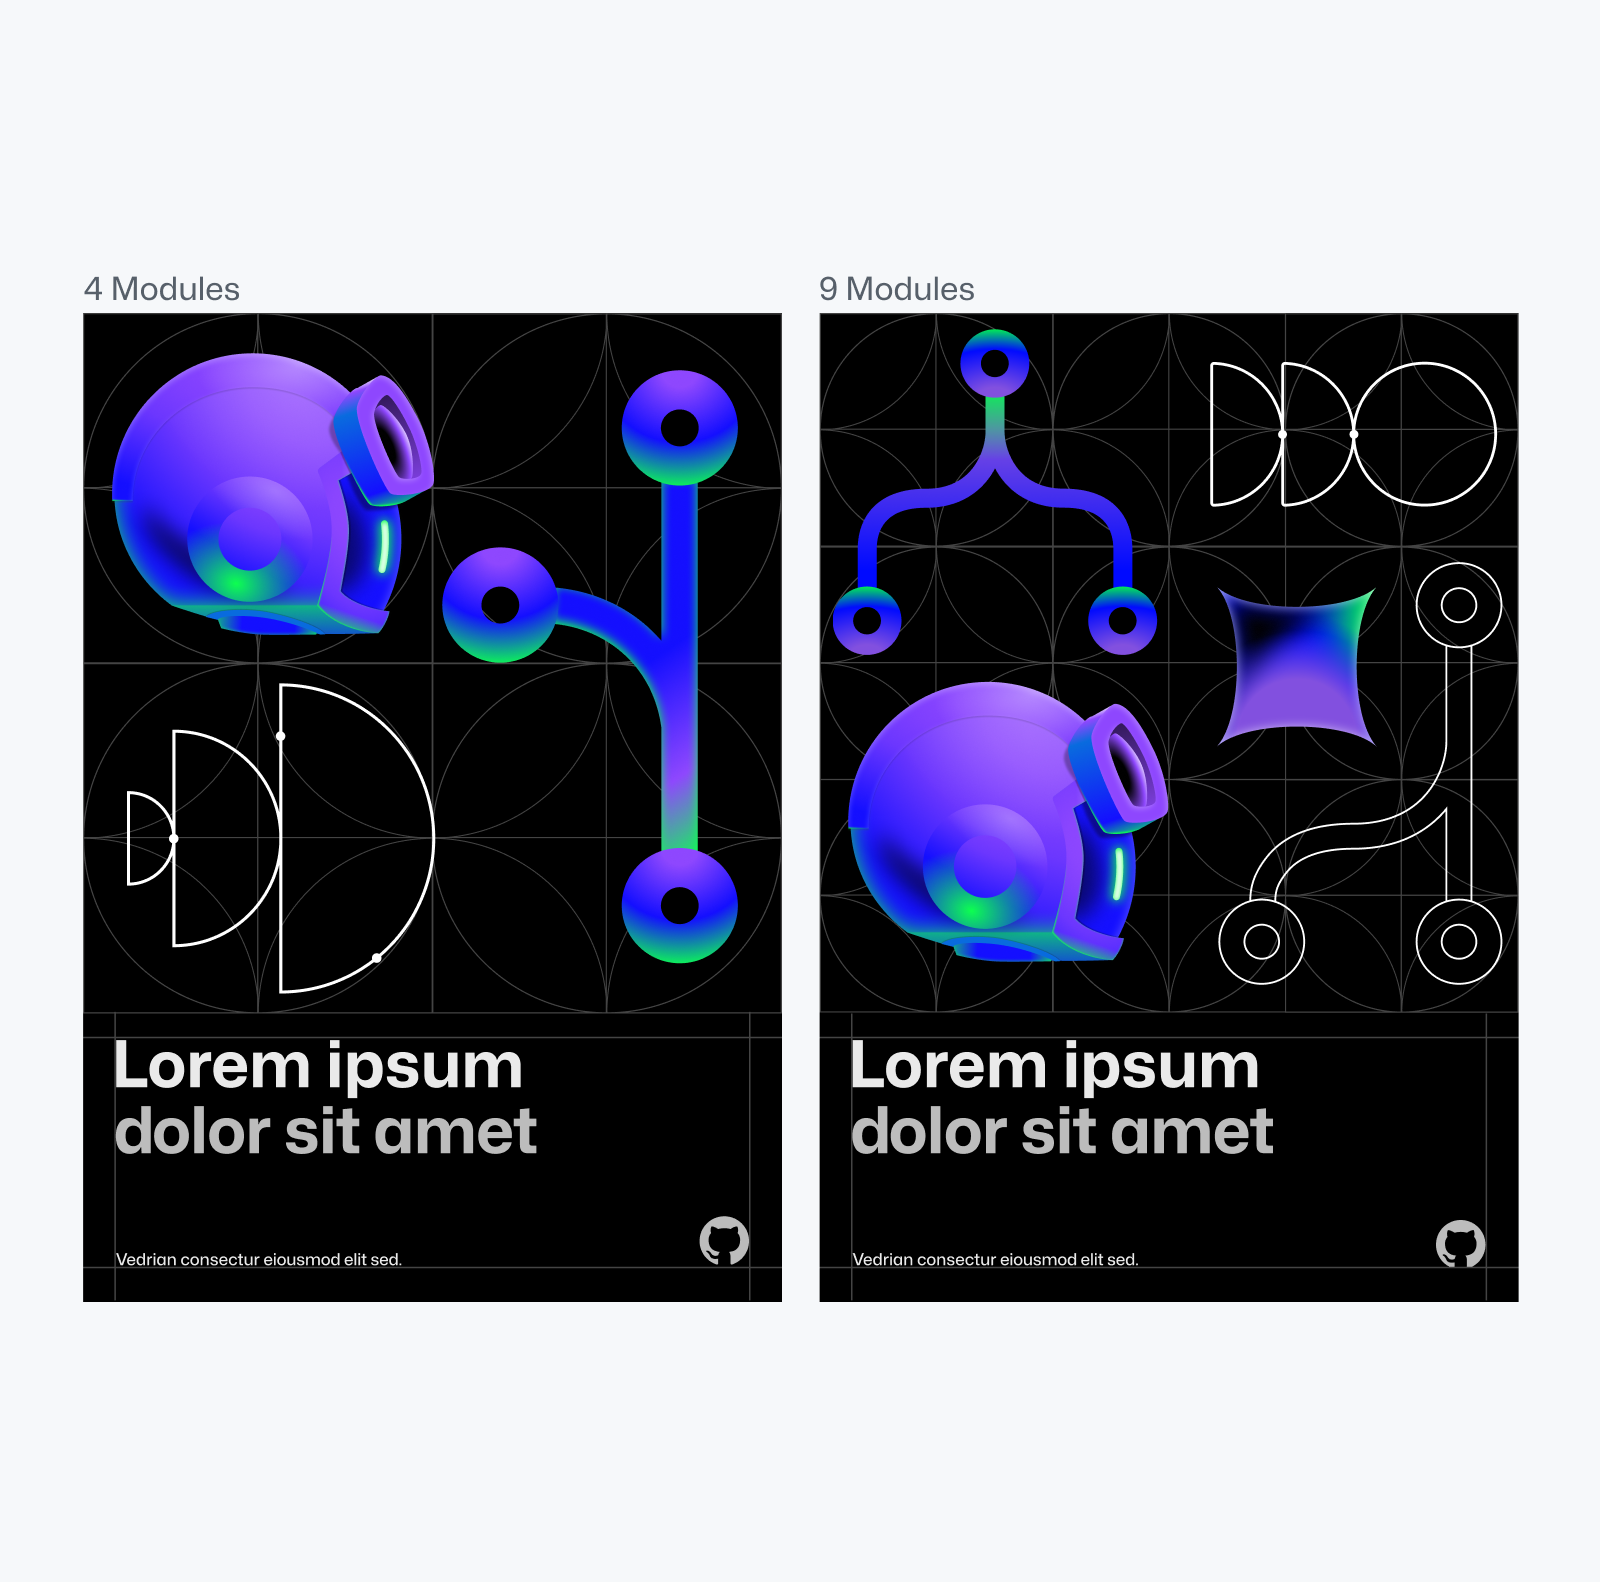 Two black portrait rectangular compositions side by side. Text above them reads "4 modules" and "9 modules" respectively. Compositions feature placeholder lorem ipsum text on the bottom in white and light gray, with abstract illustrations on the top.